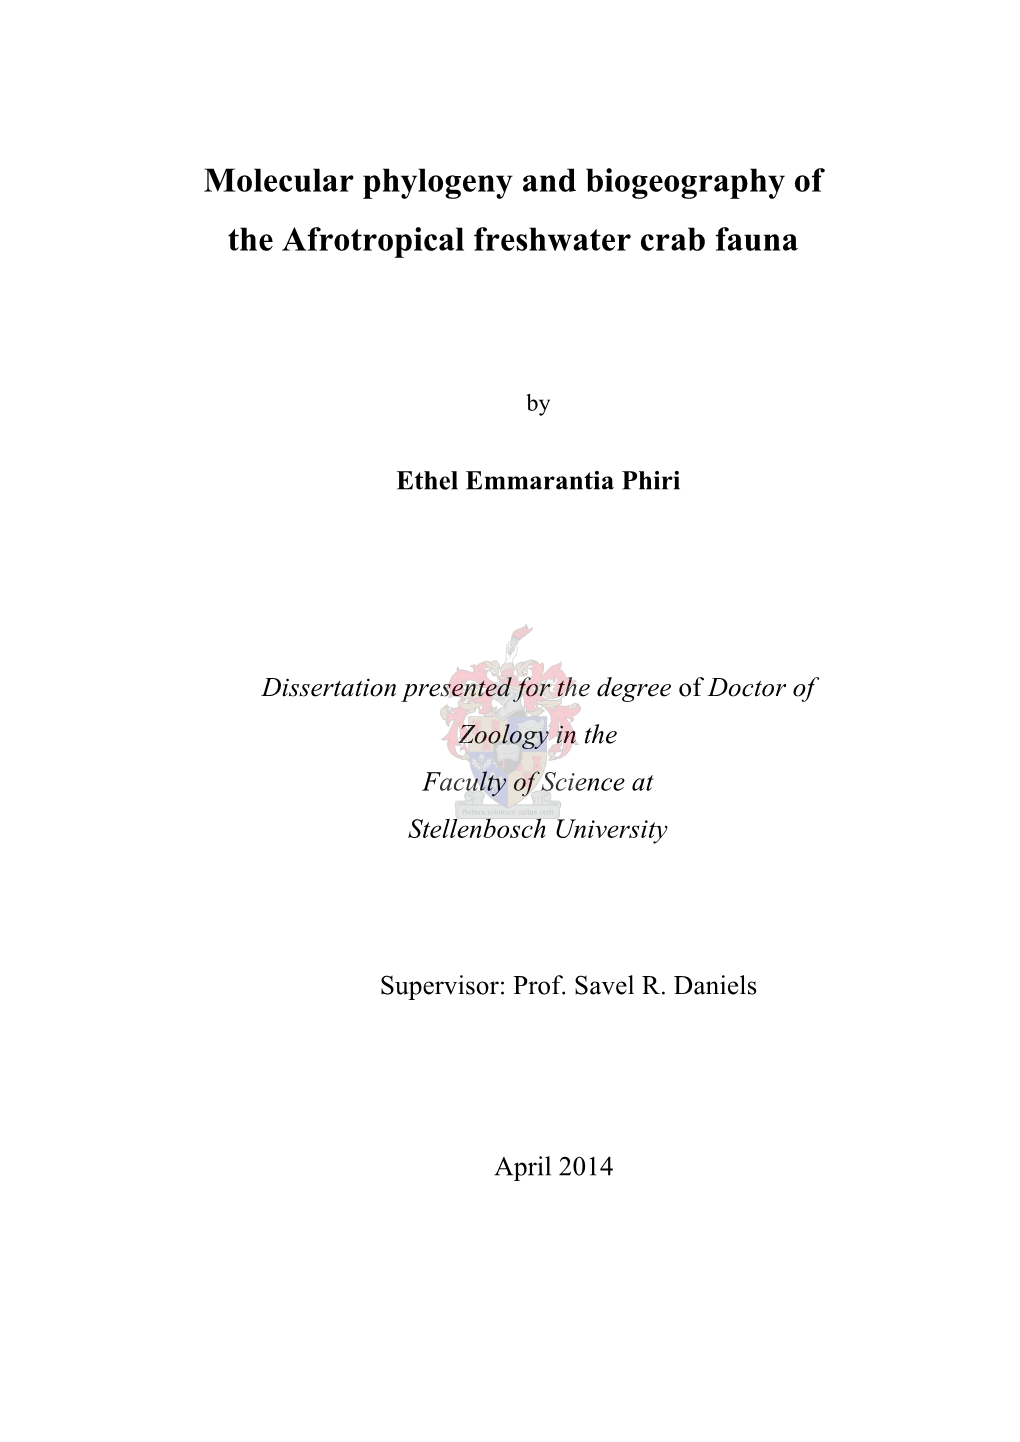 Molecular Phylogeny and Biogeography of the Afrotropical Freshwater Crab Fauna